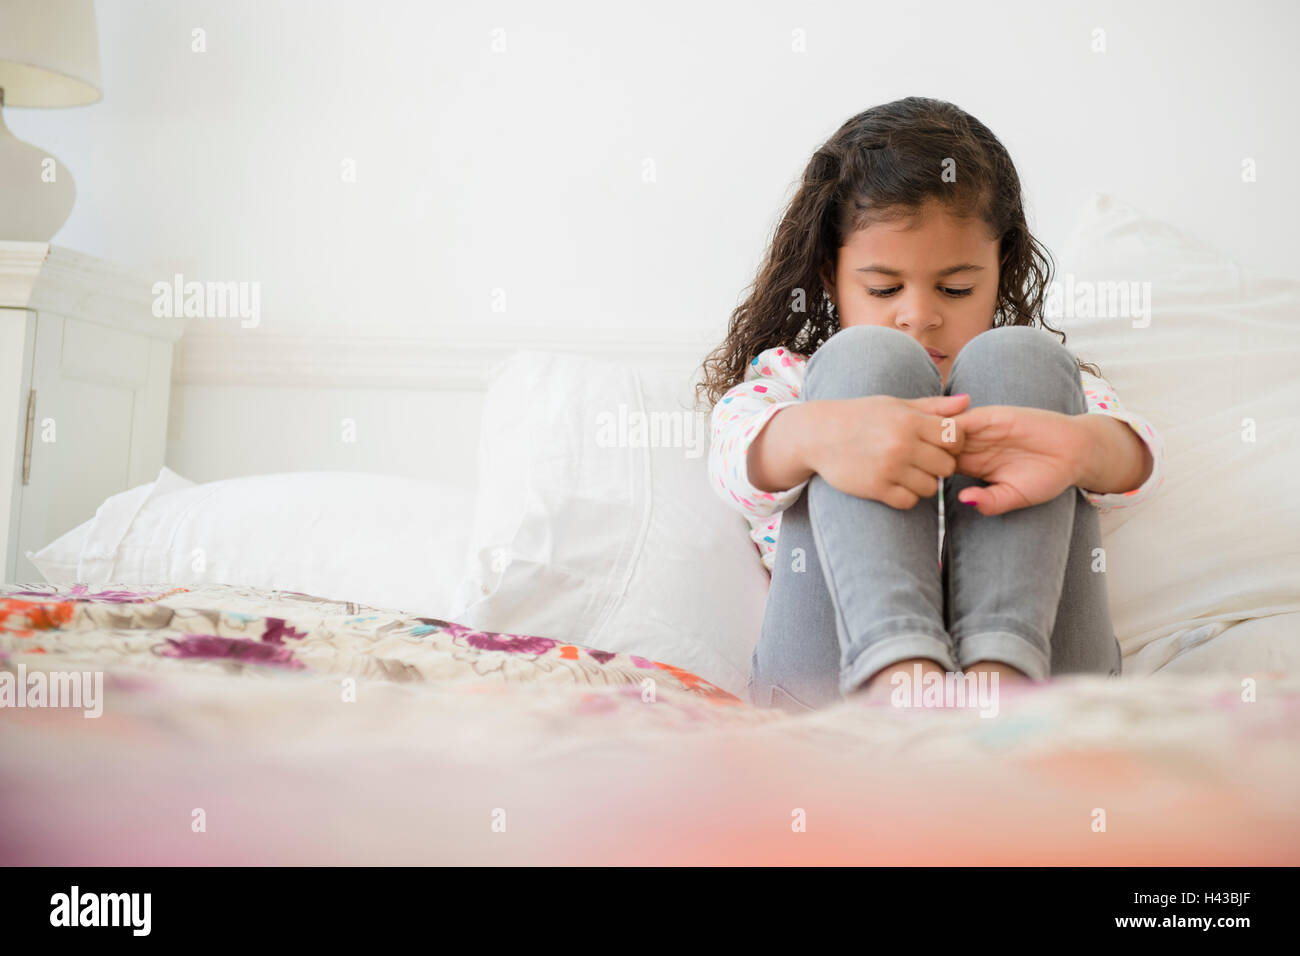 Unhappy Mixed Race girl sitting on bed Stock Photo